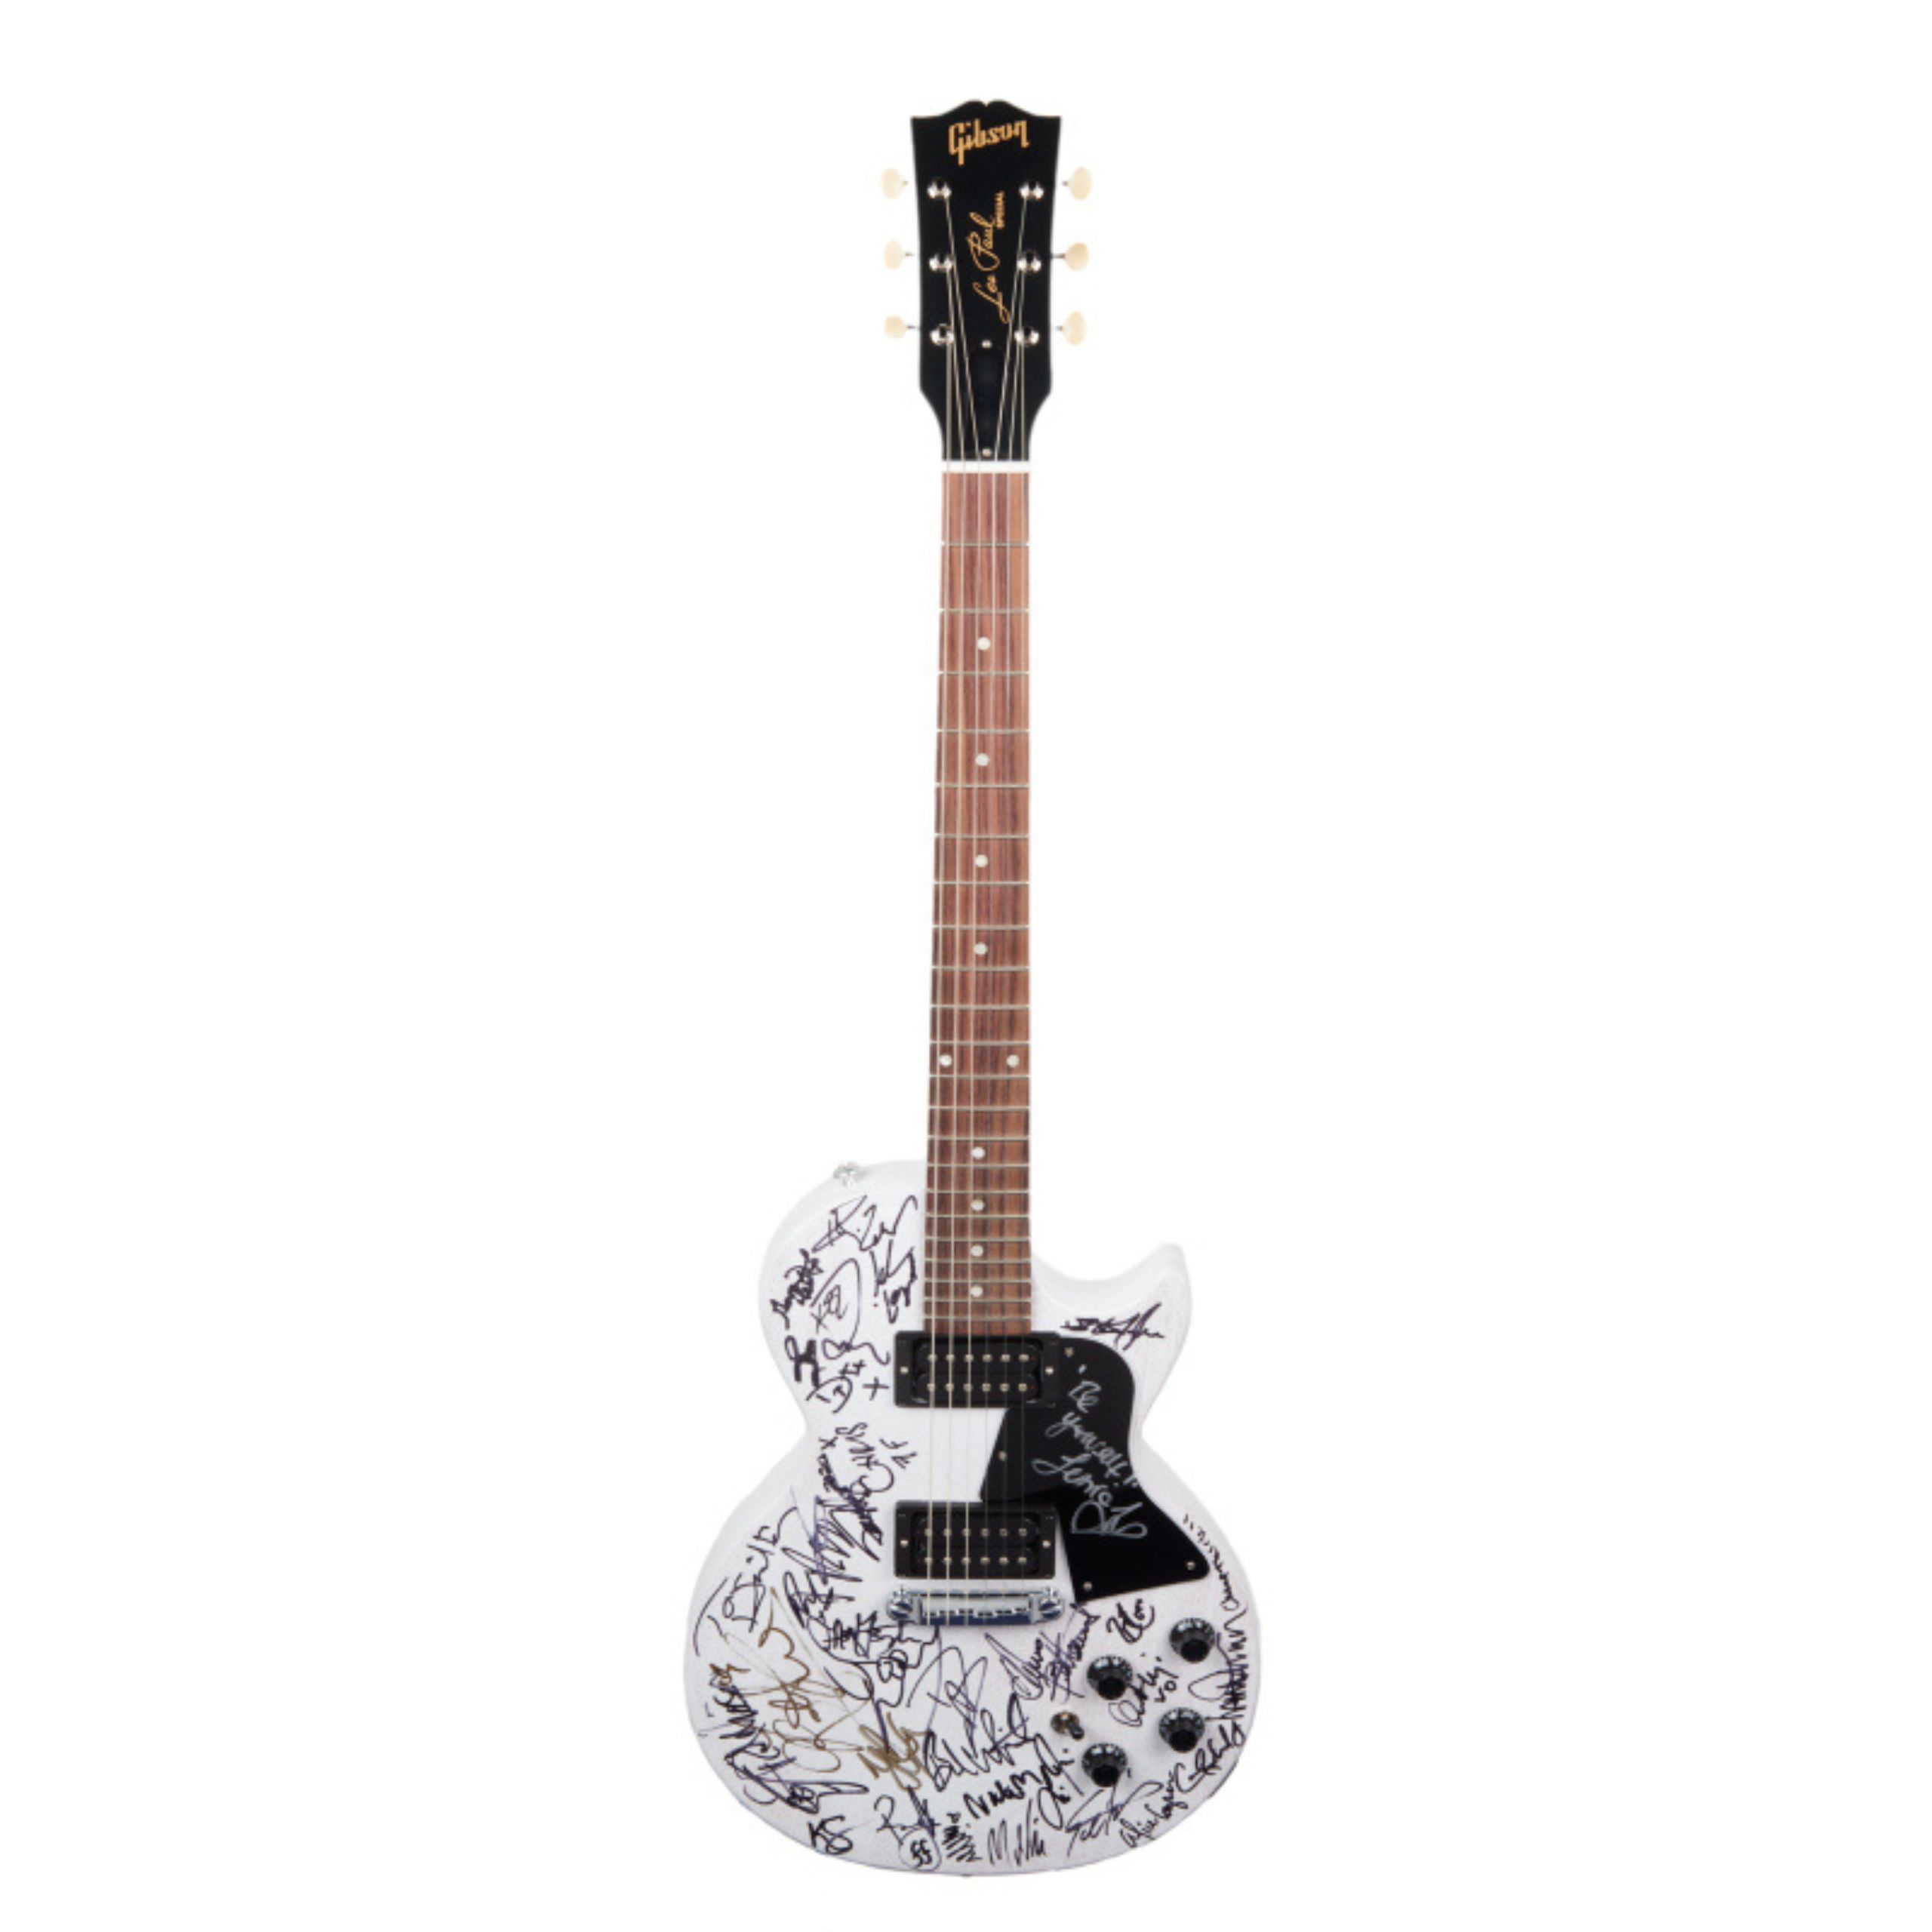 A guitar signed by several artists is for sale at an auction for charity